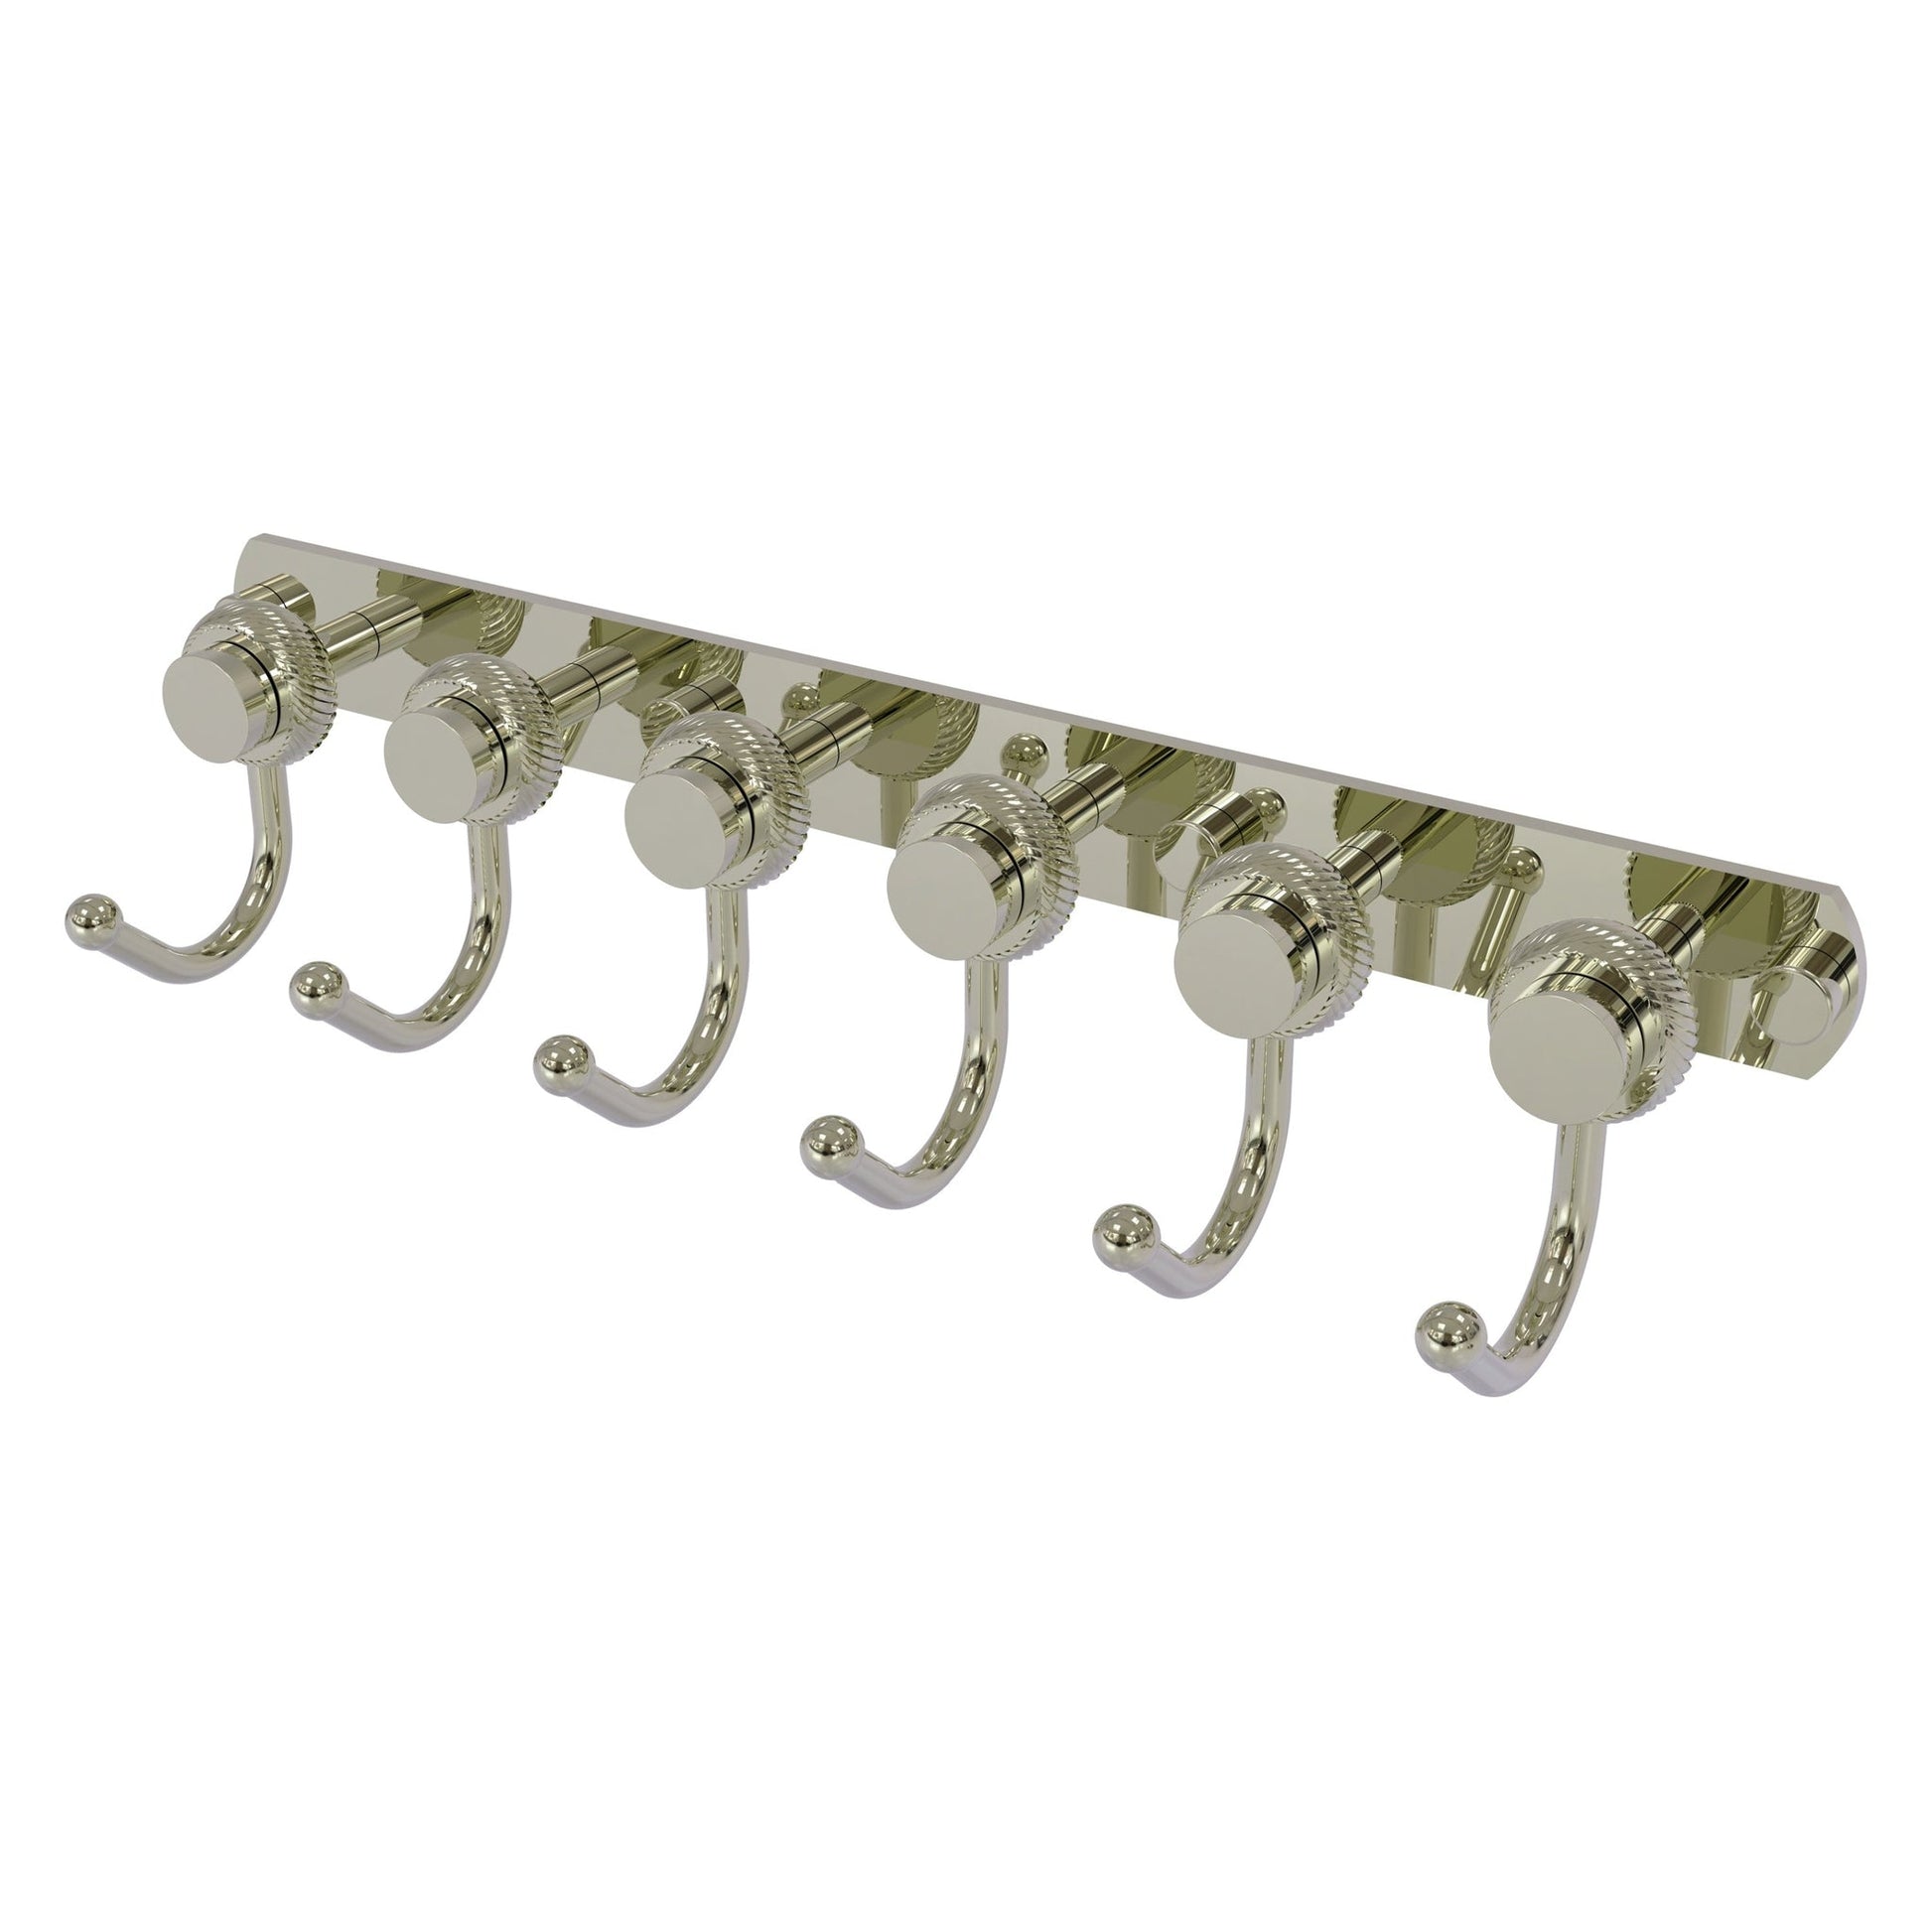 Allied Brass Mercury 15.5" x 4" Polished Nickel Solid Brass 6-Position Tie and Belt Rack With Twisted Accent